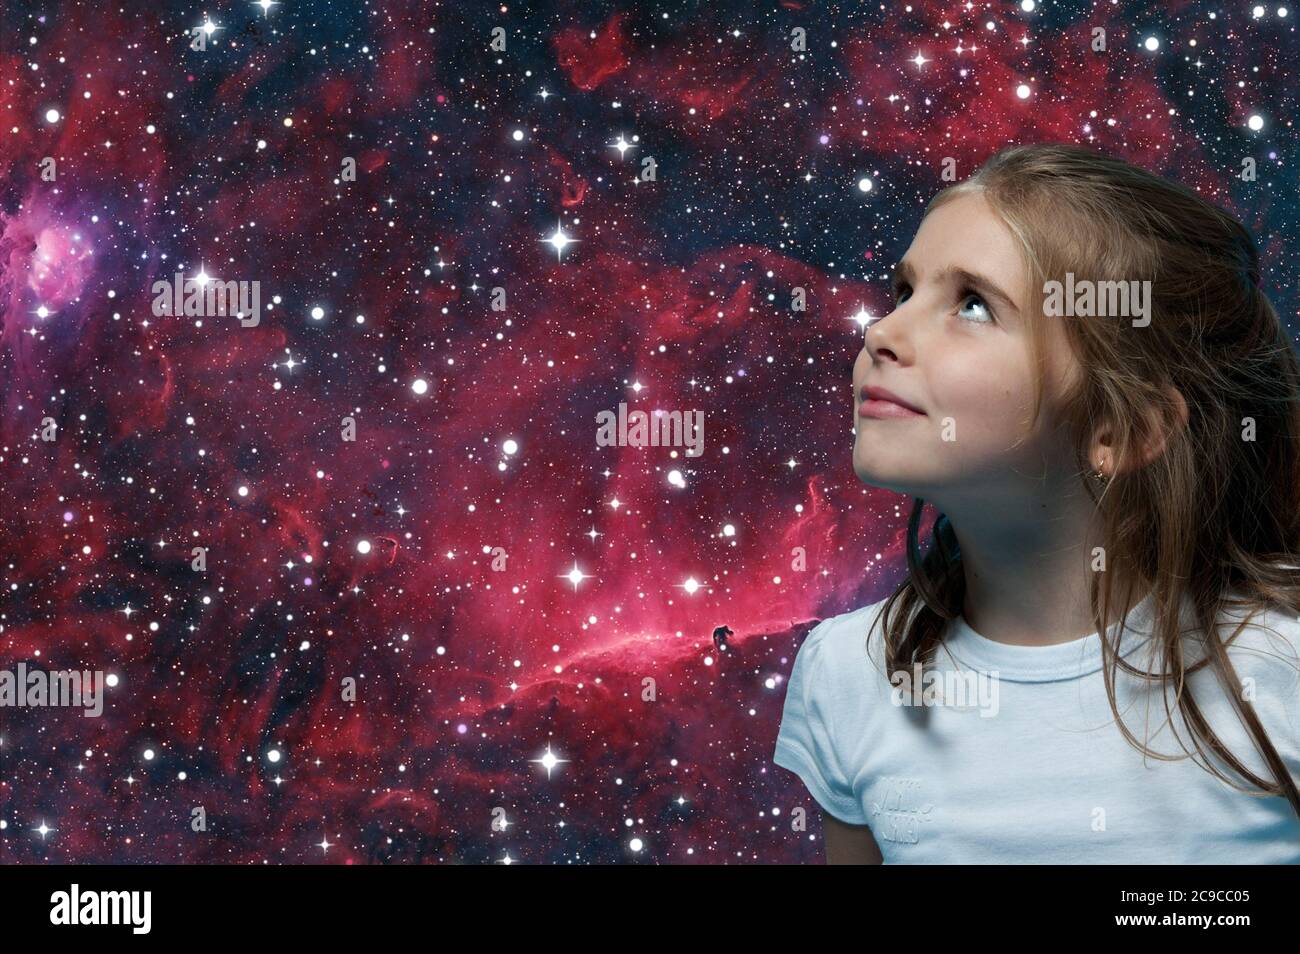 young girl looking at the stars Stock Photo